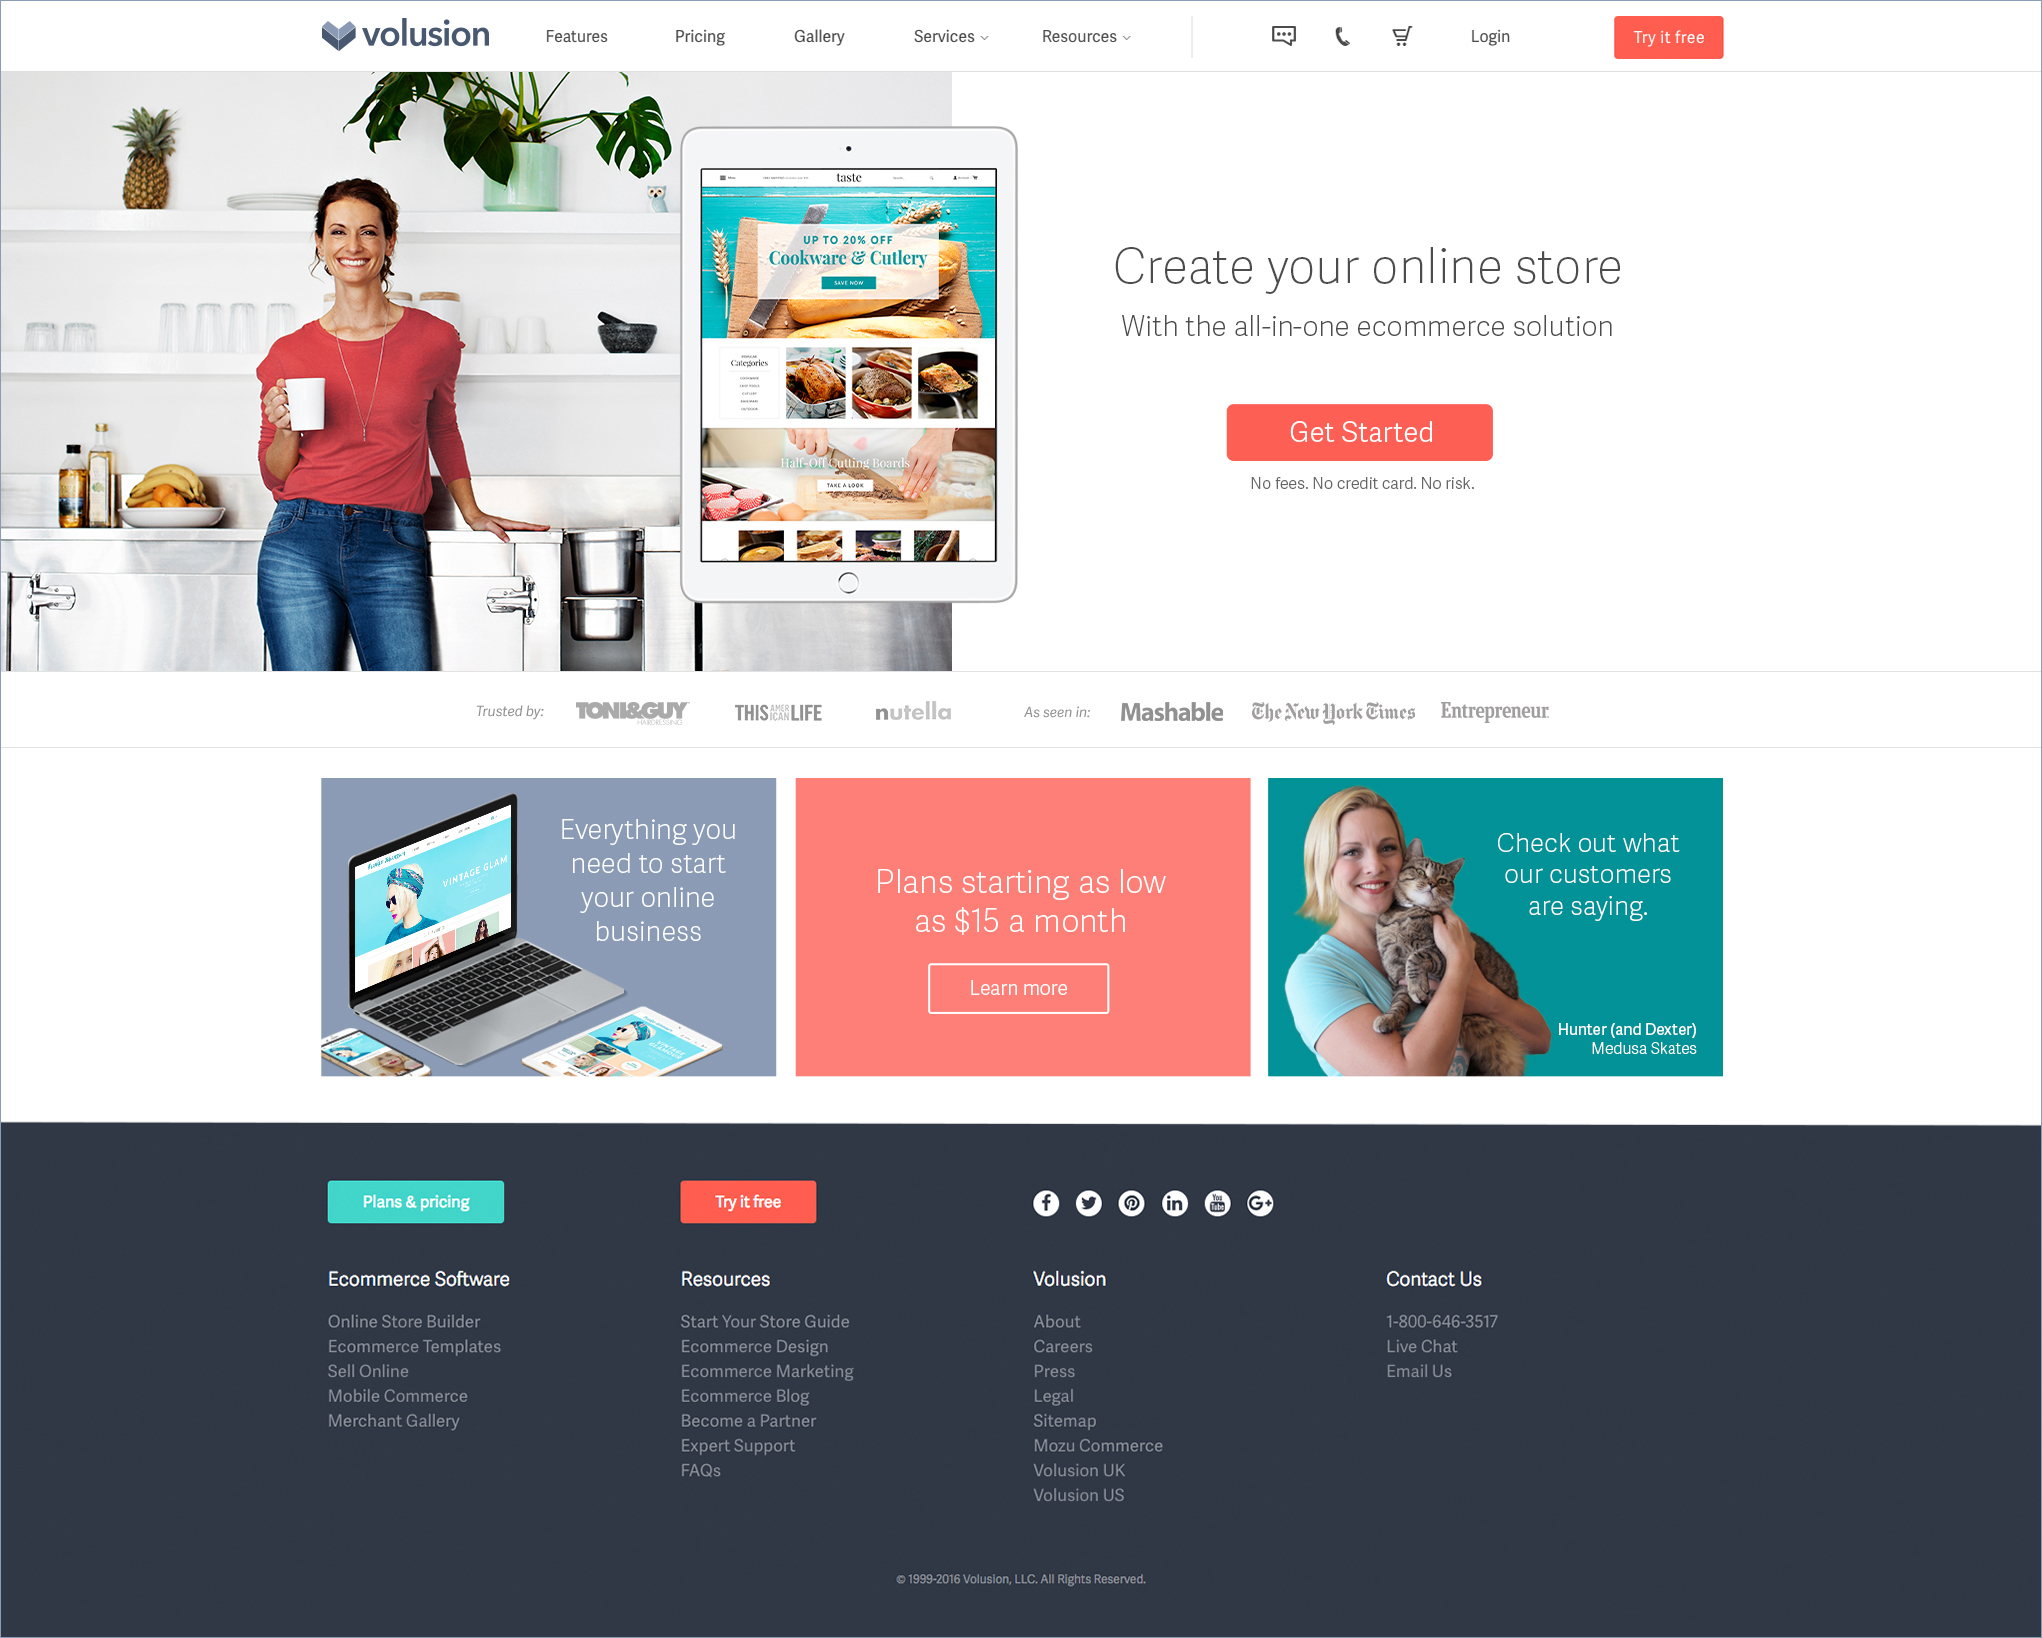 Short form homepage